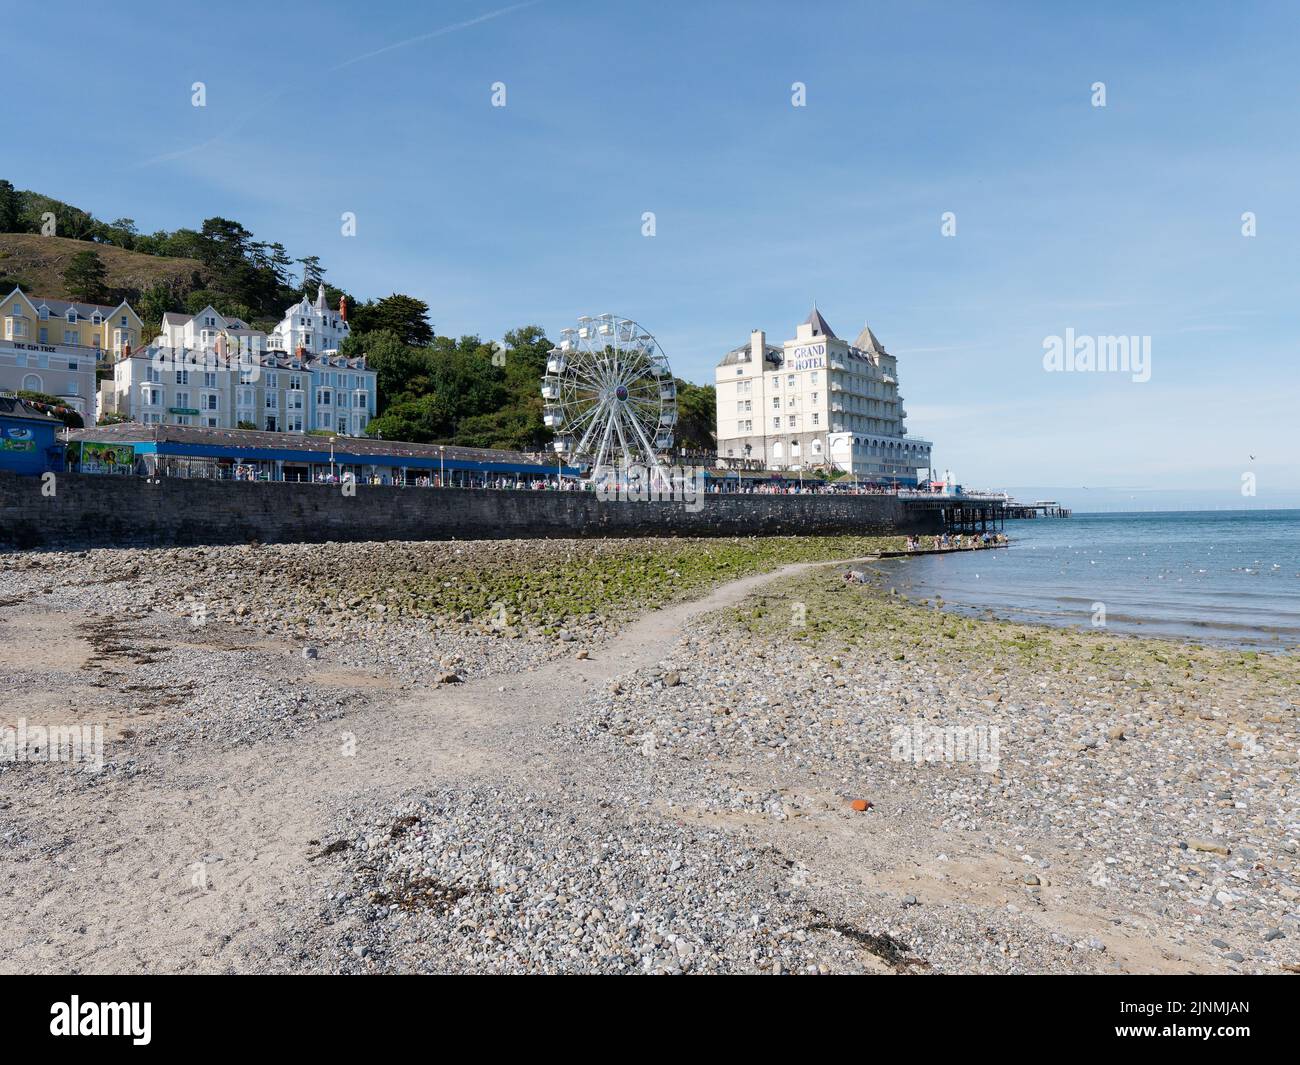 Llandudno, Clwyd, Wales, August 07 2022: Grand Hotel and big wheel as seen from the beach. Stock Photo